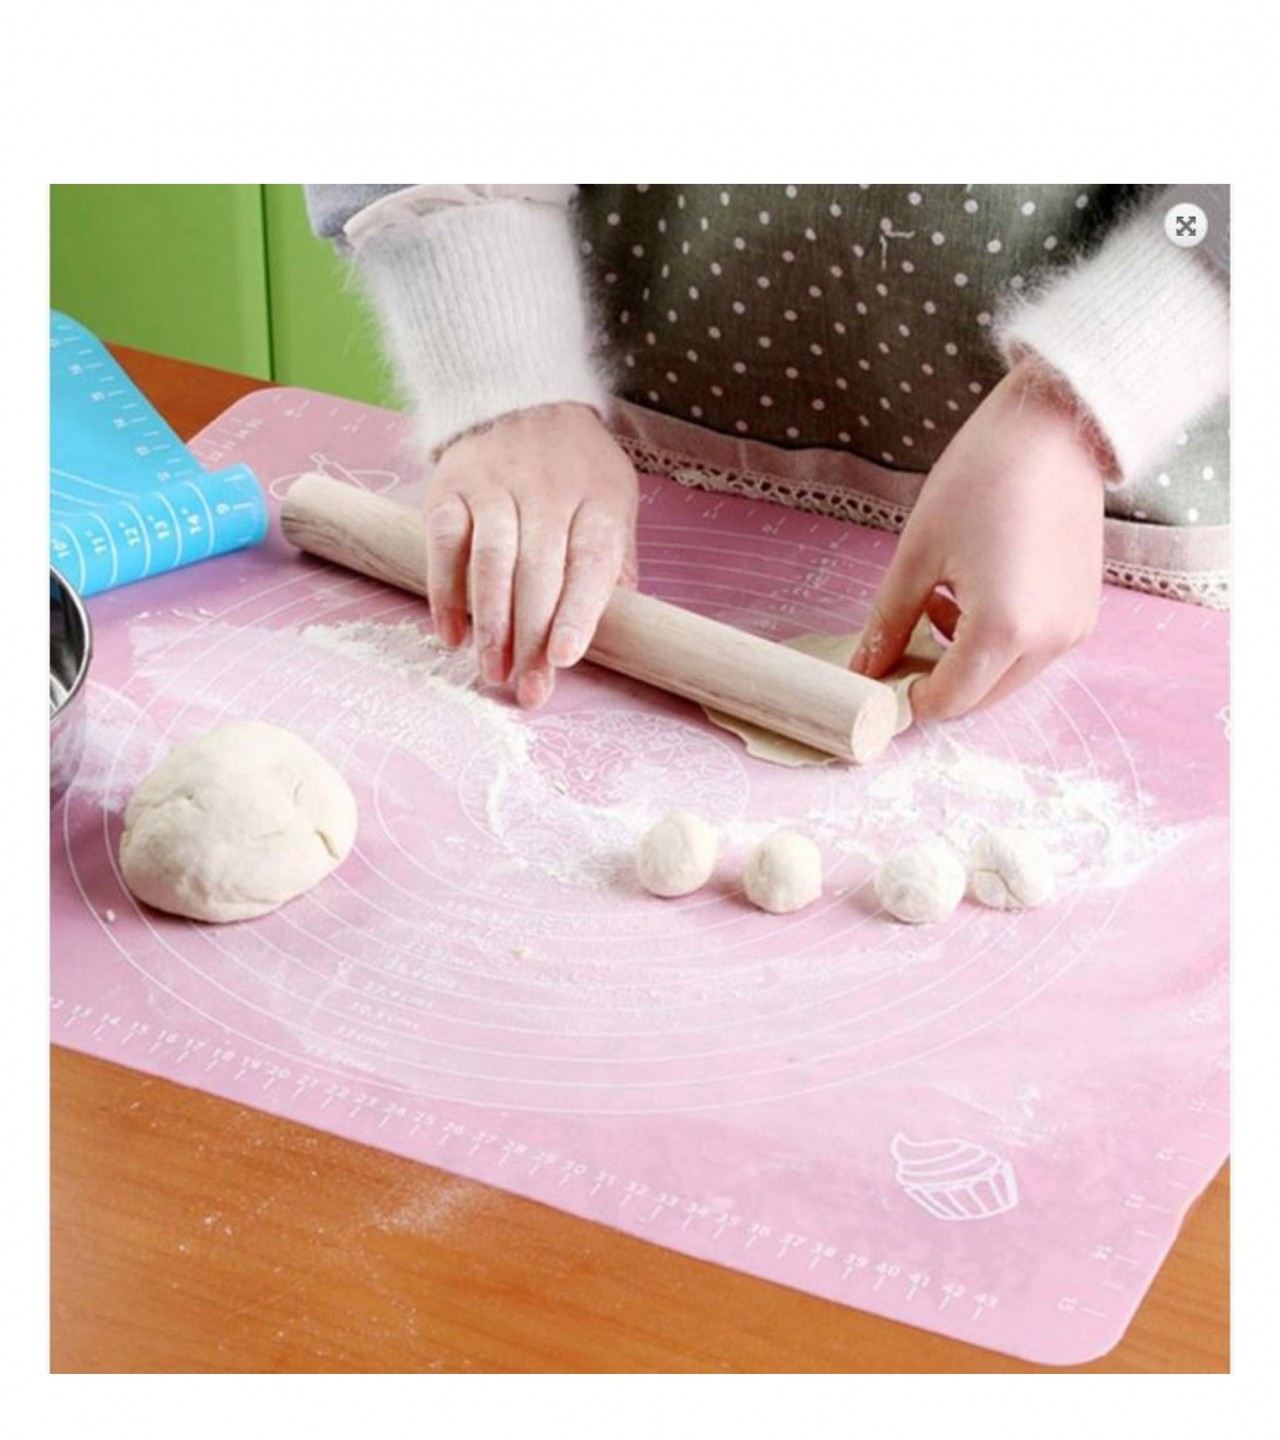 Silicone Baking Mat for Pastry & Roti Rolling Medium - Size 15.5*19.5inch